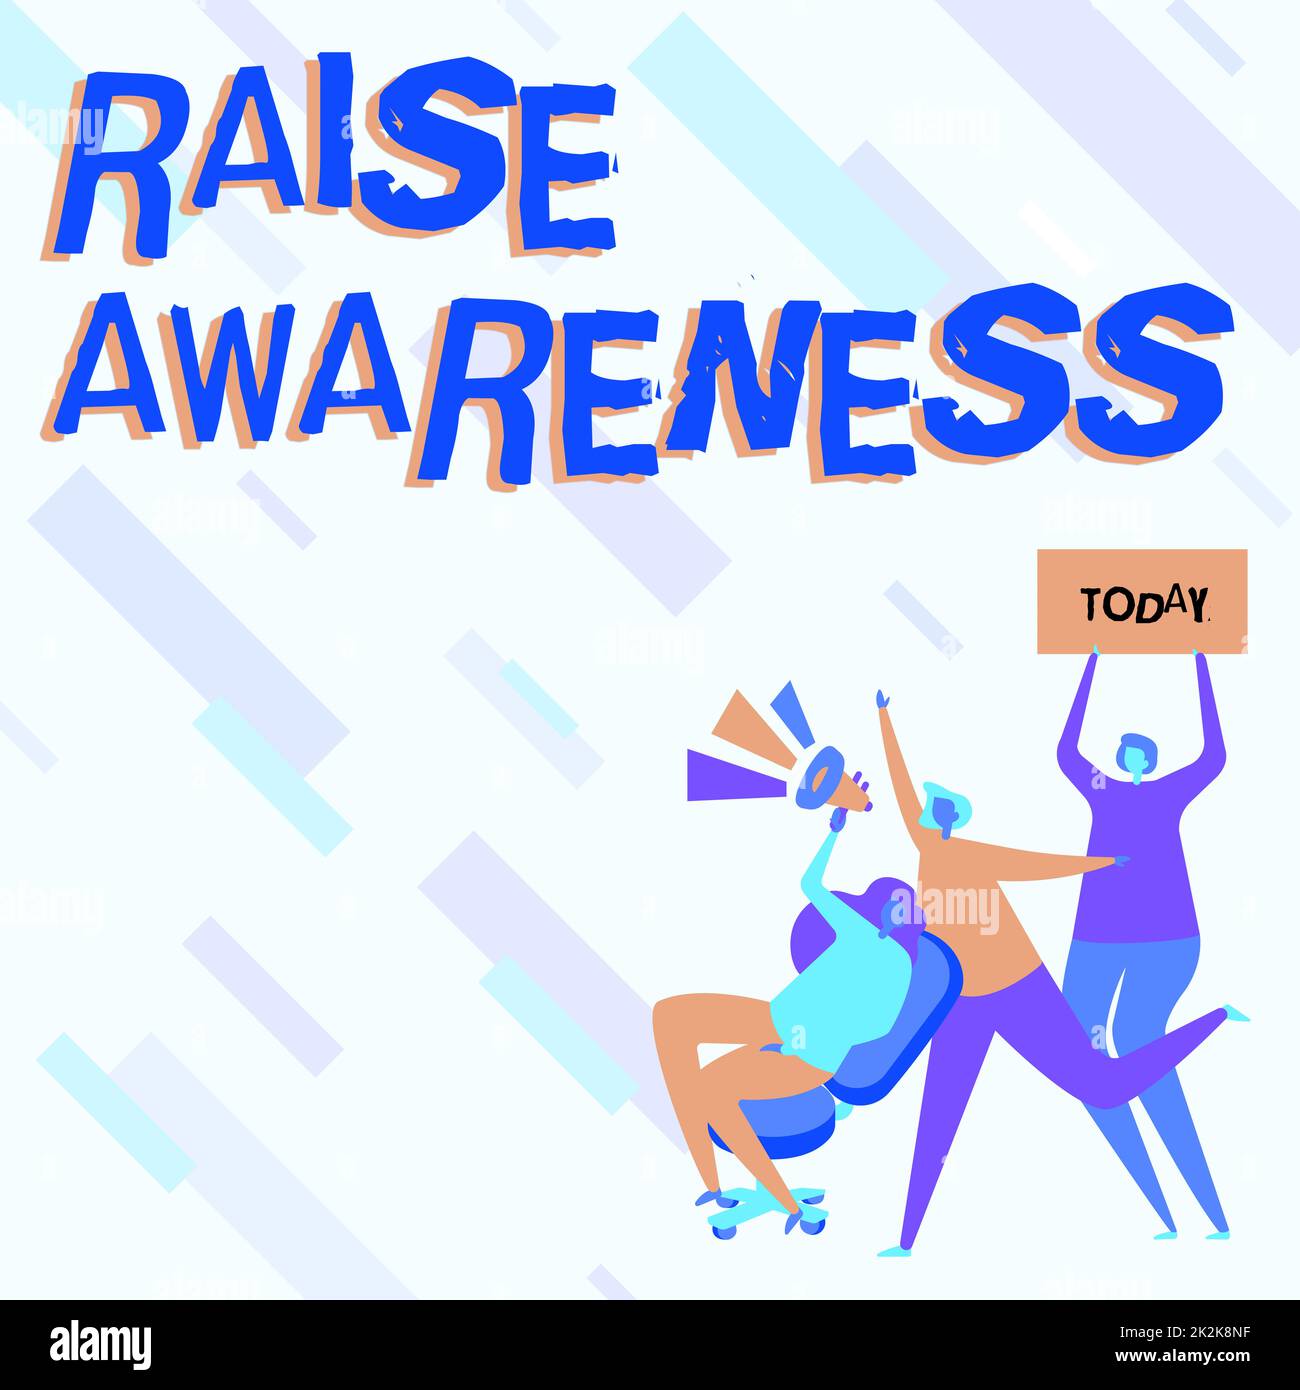 Inspiration showing sign Raise Awareness. Business concept creating a specific messaging campaign about an issue Woman Drawing Sitting Holding Megaphone Making Announcement. Stock Photo